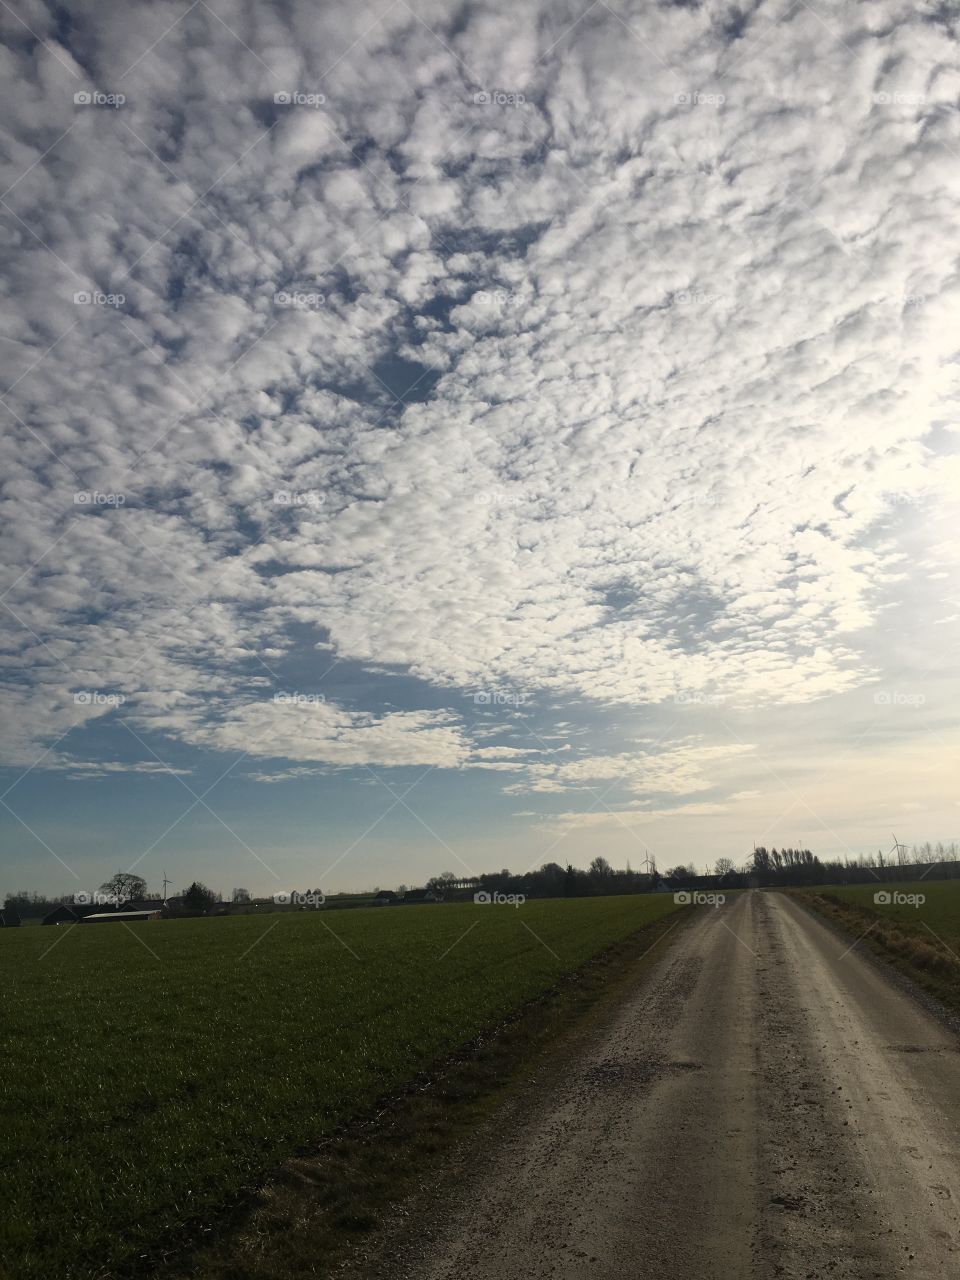 Skies and country roads 2